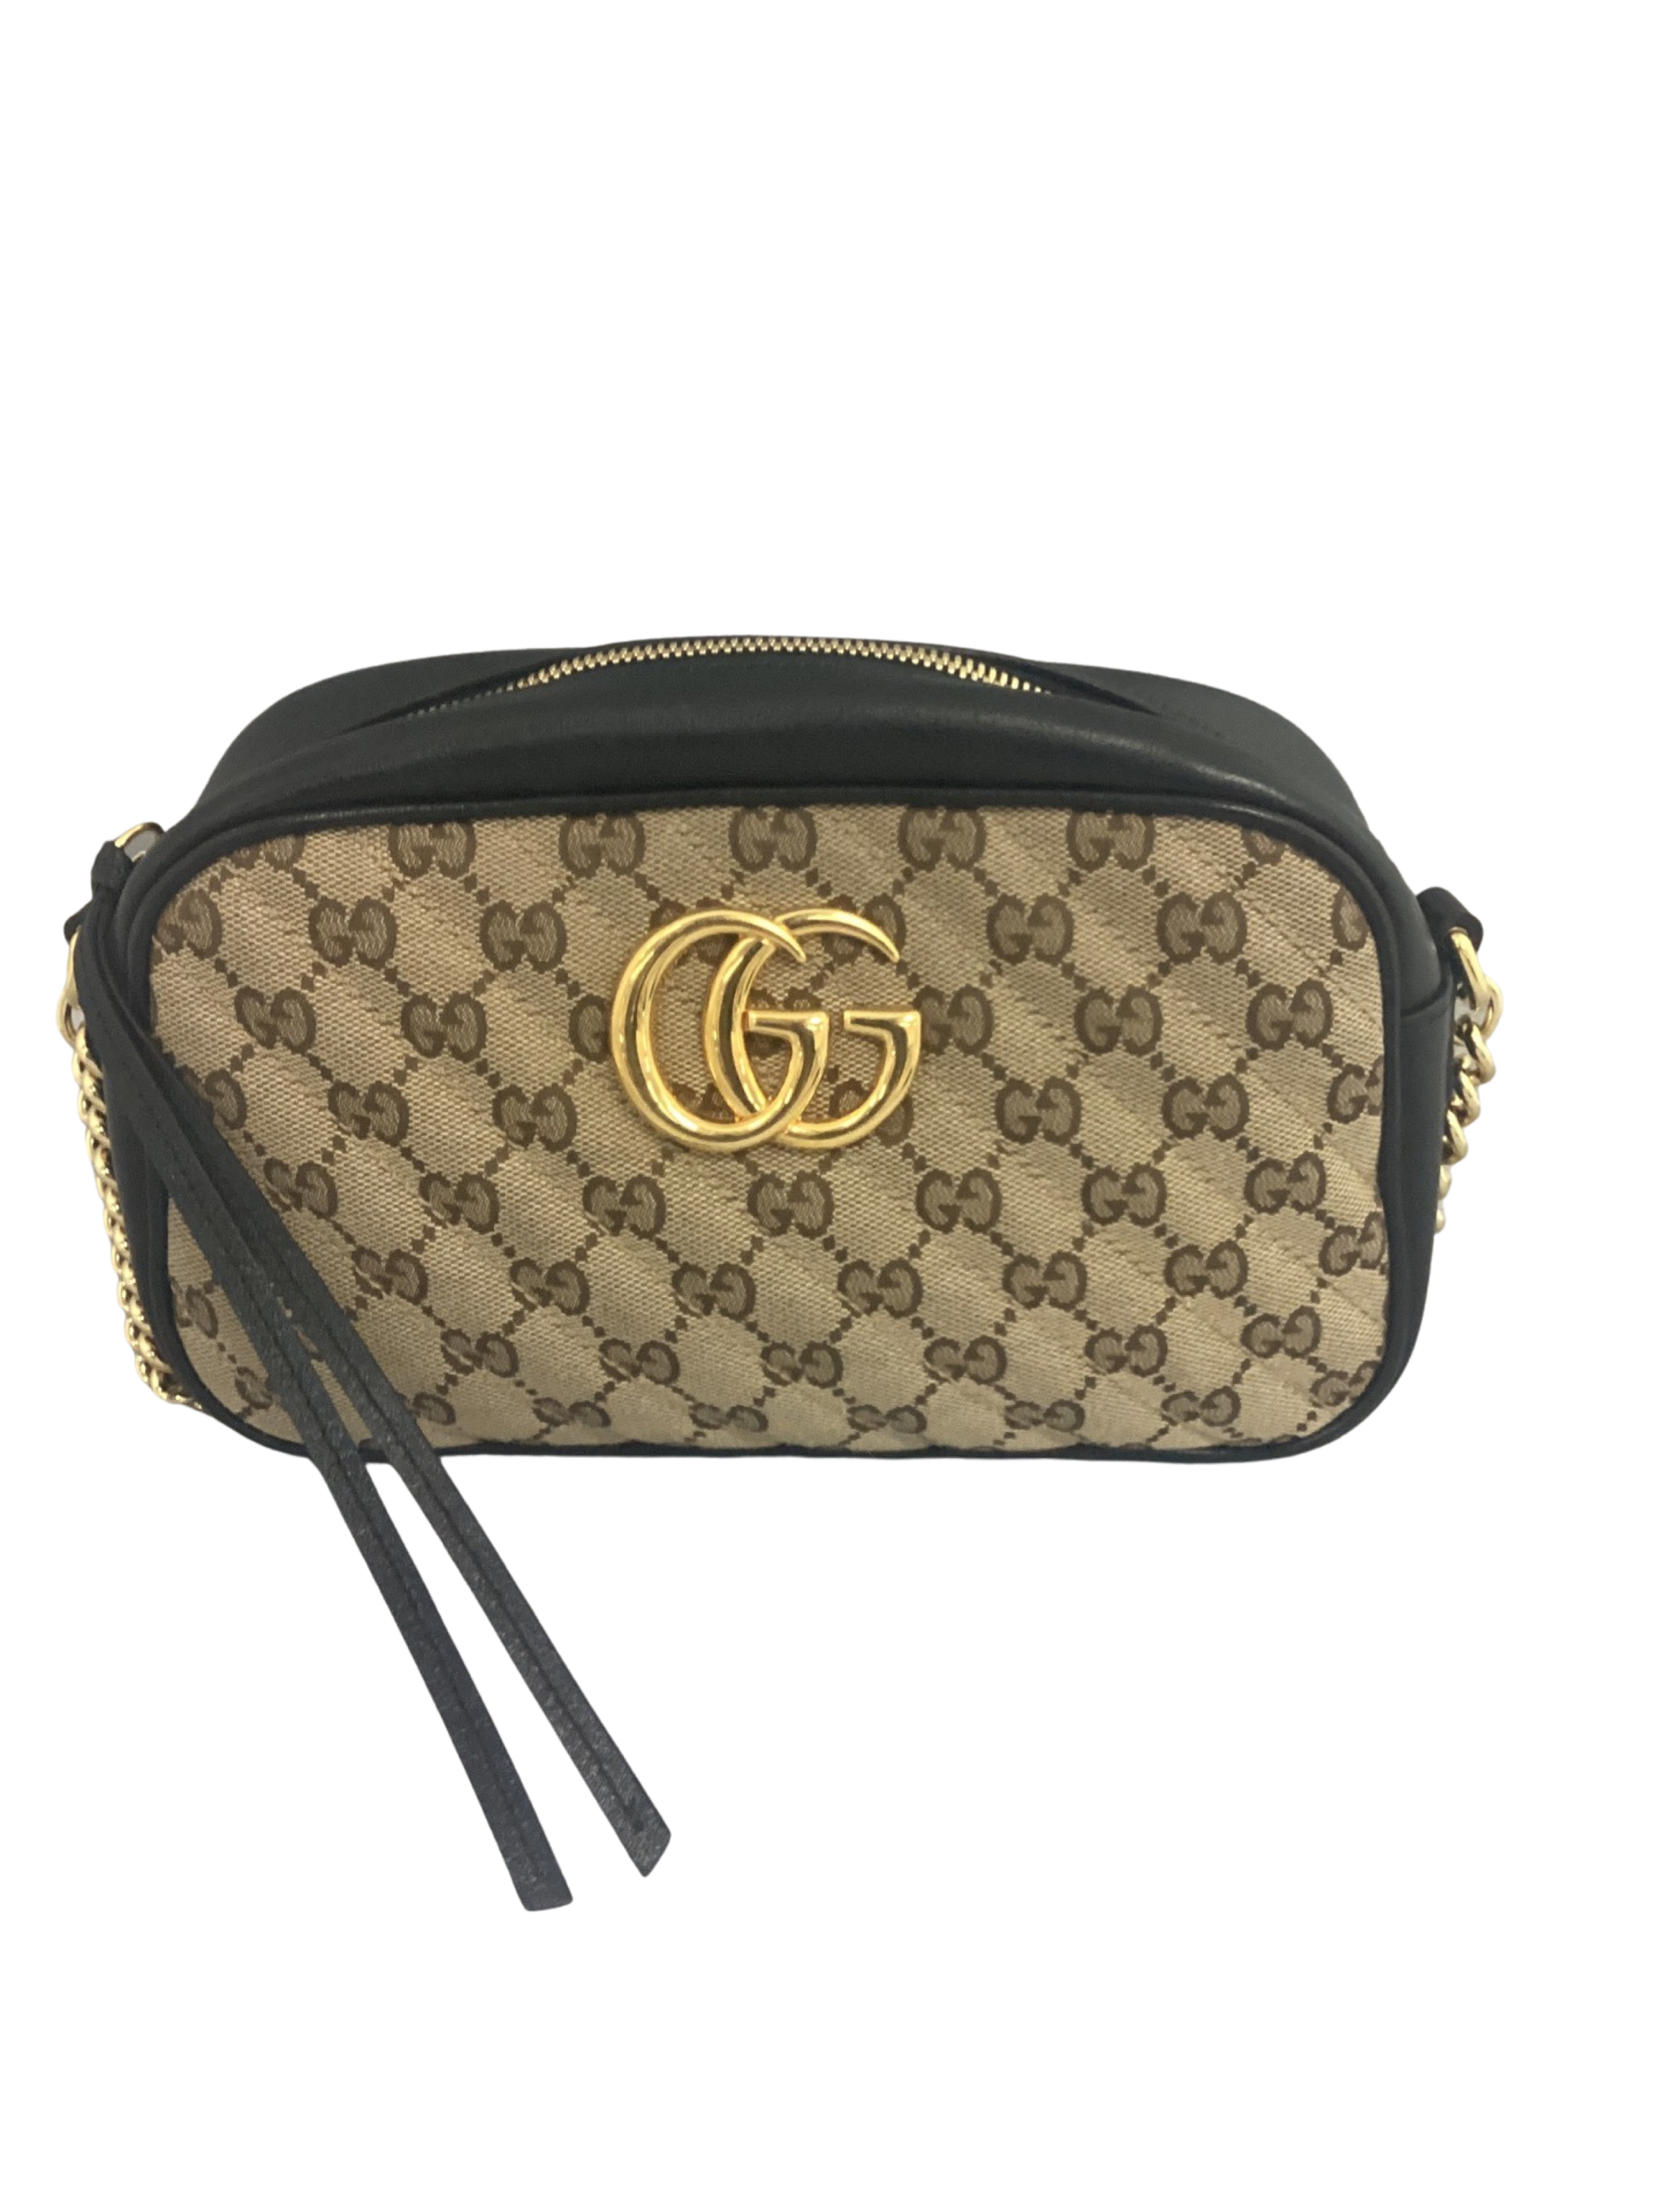 Gucci GG Marmont Mini Quilted Metallic Leather Shoulder Bag